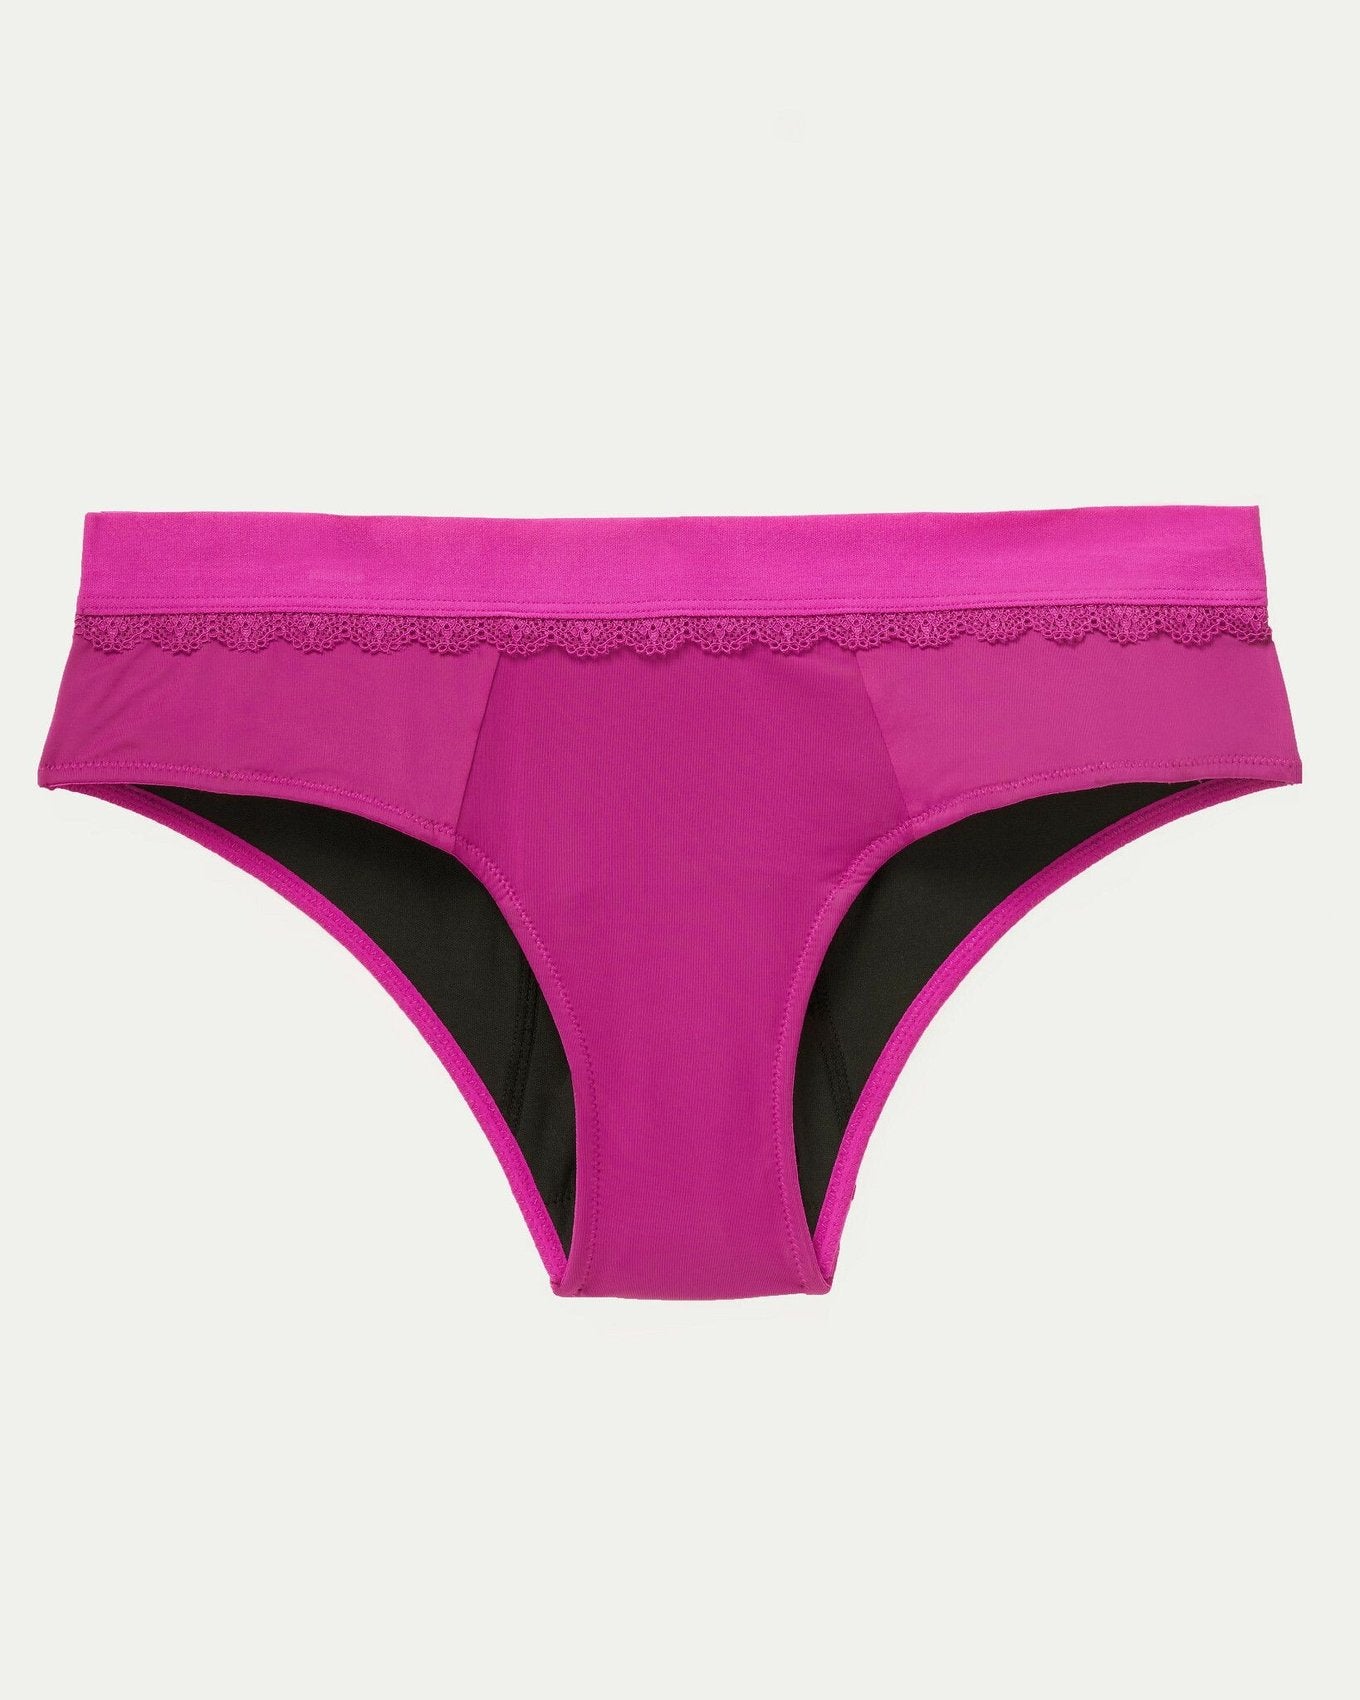 Joyja Cindy period-proof panty in color Festival Fuchsia and shape cheeky